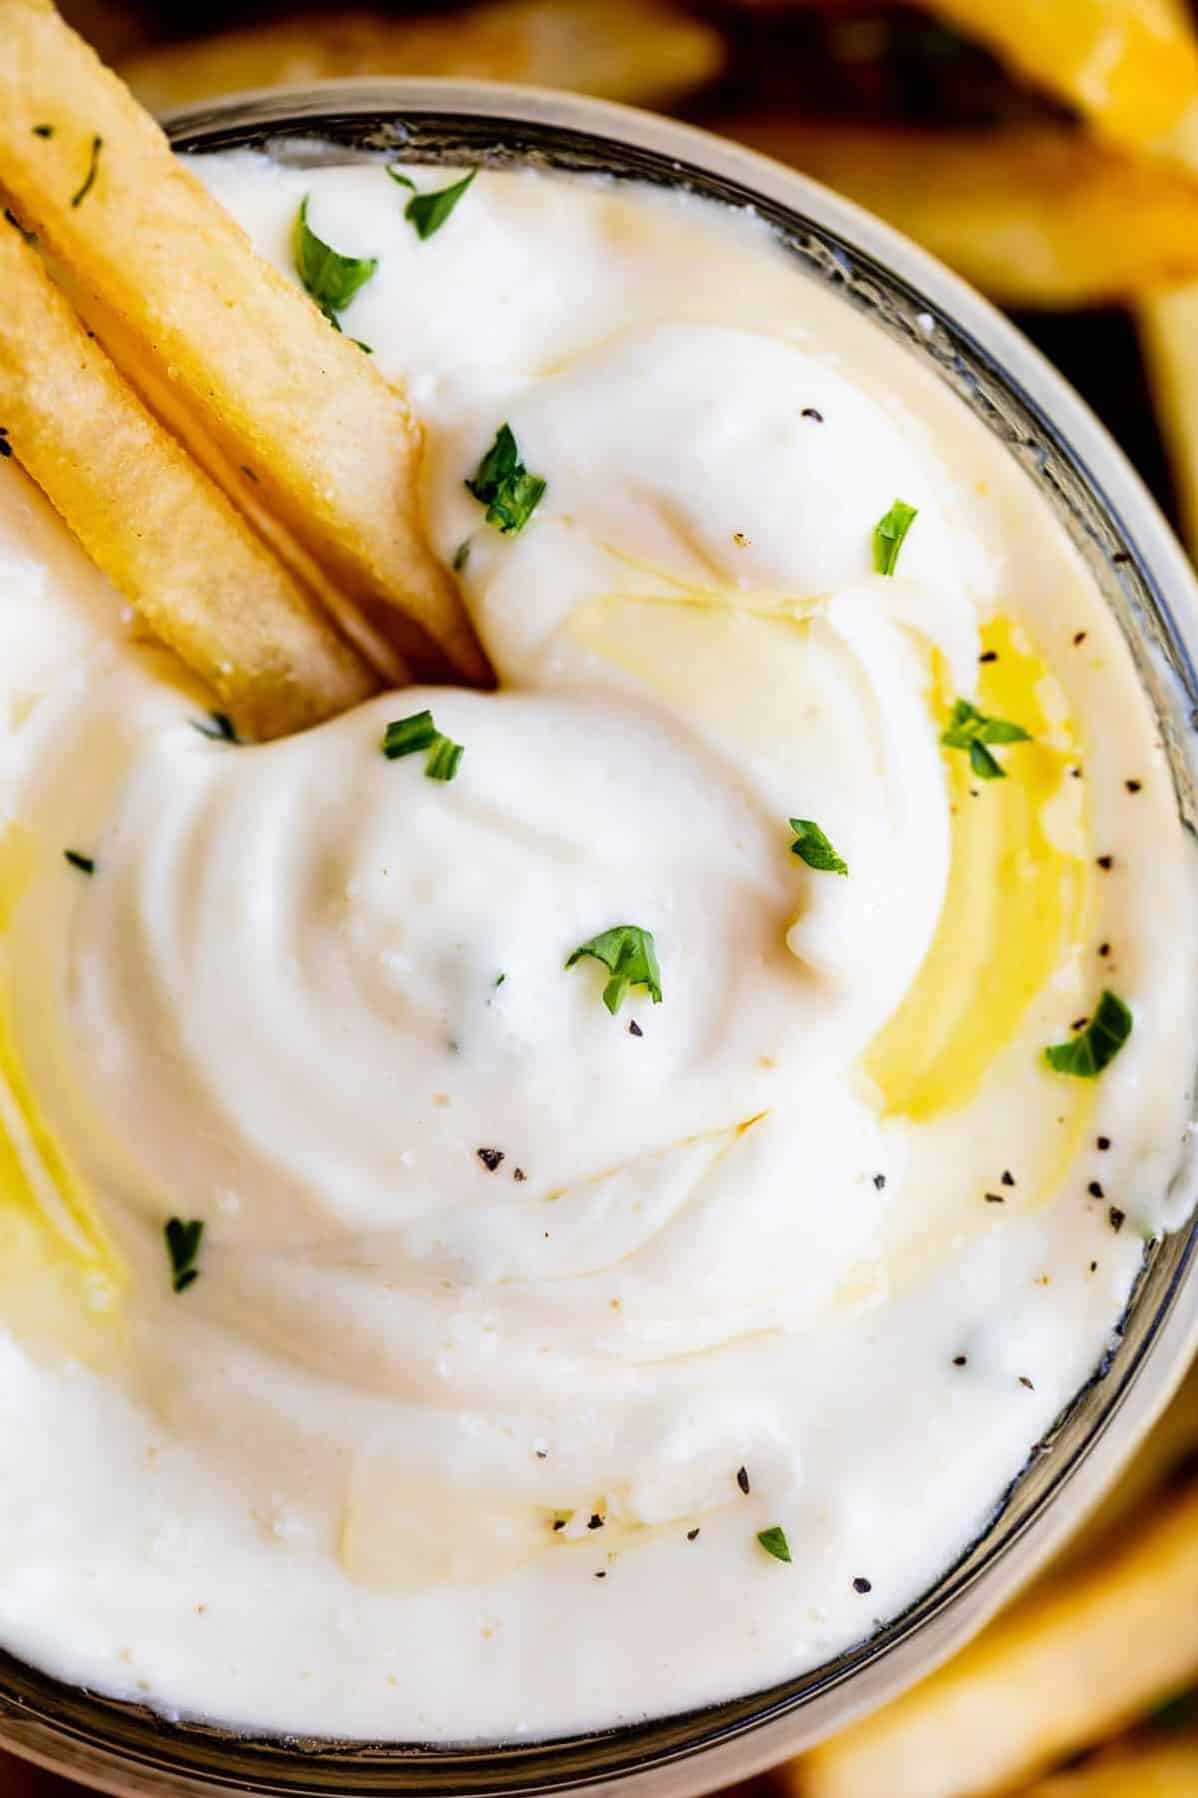  Creamy and flavorful, without the extra fat